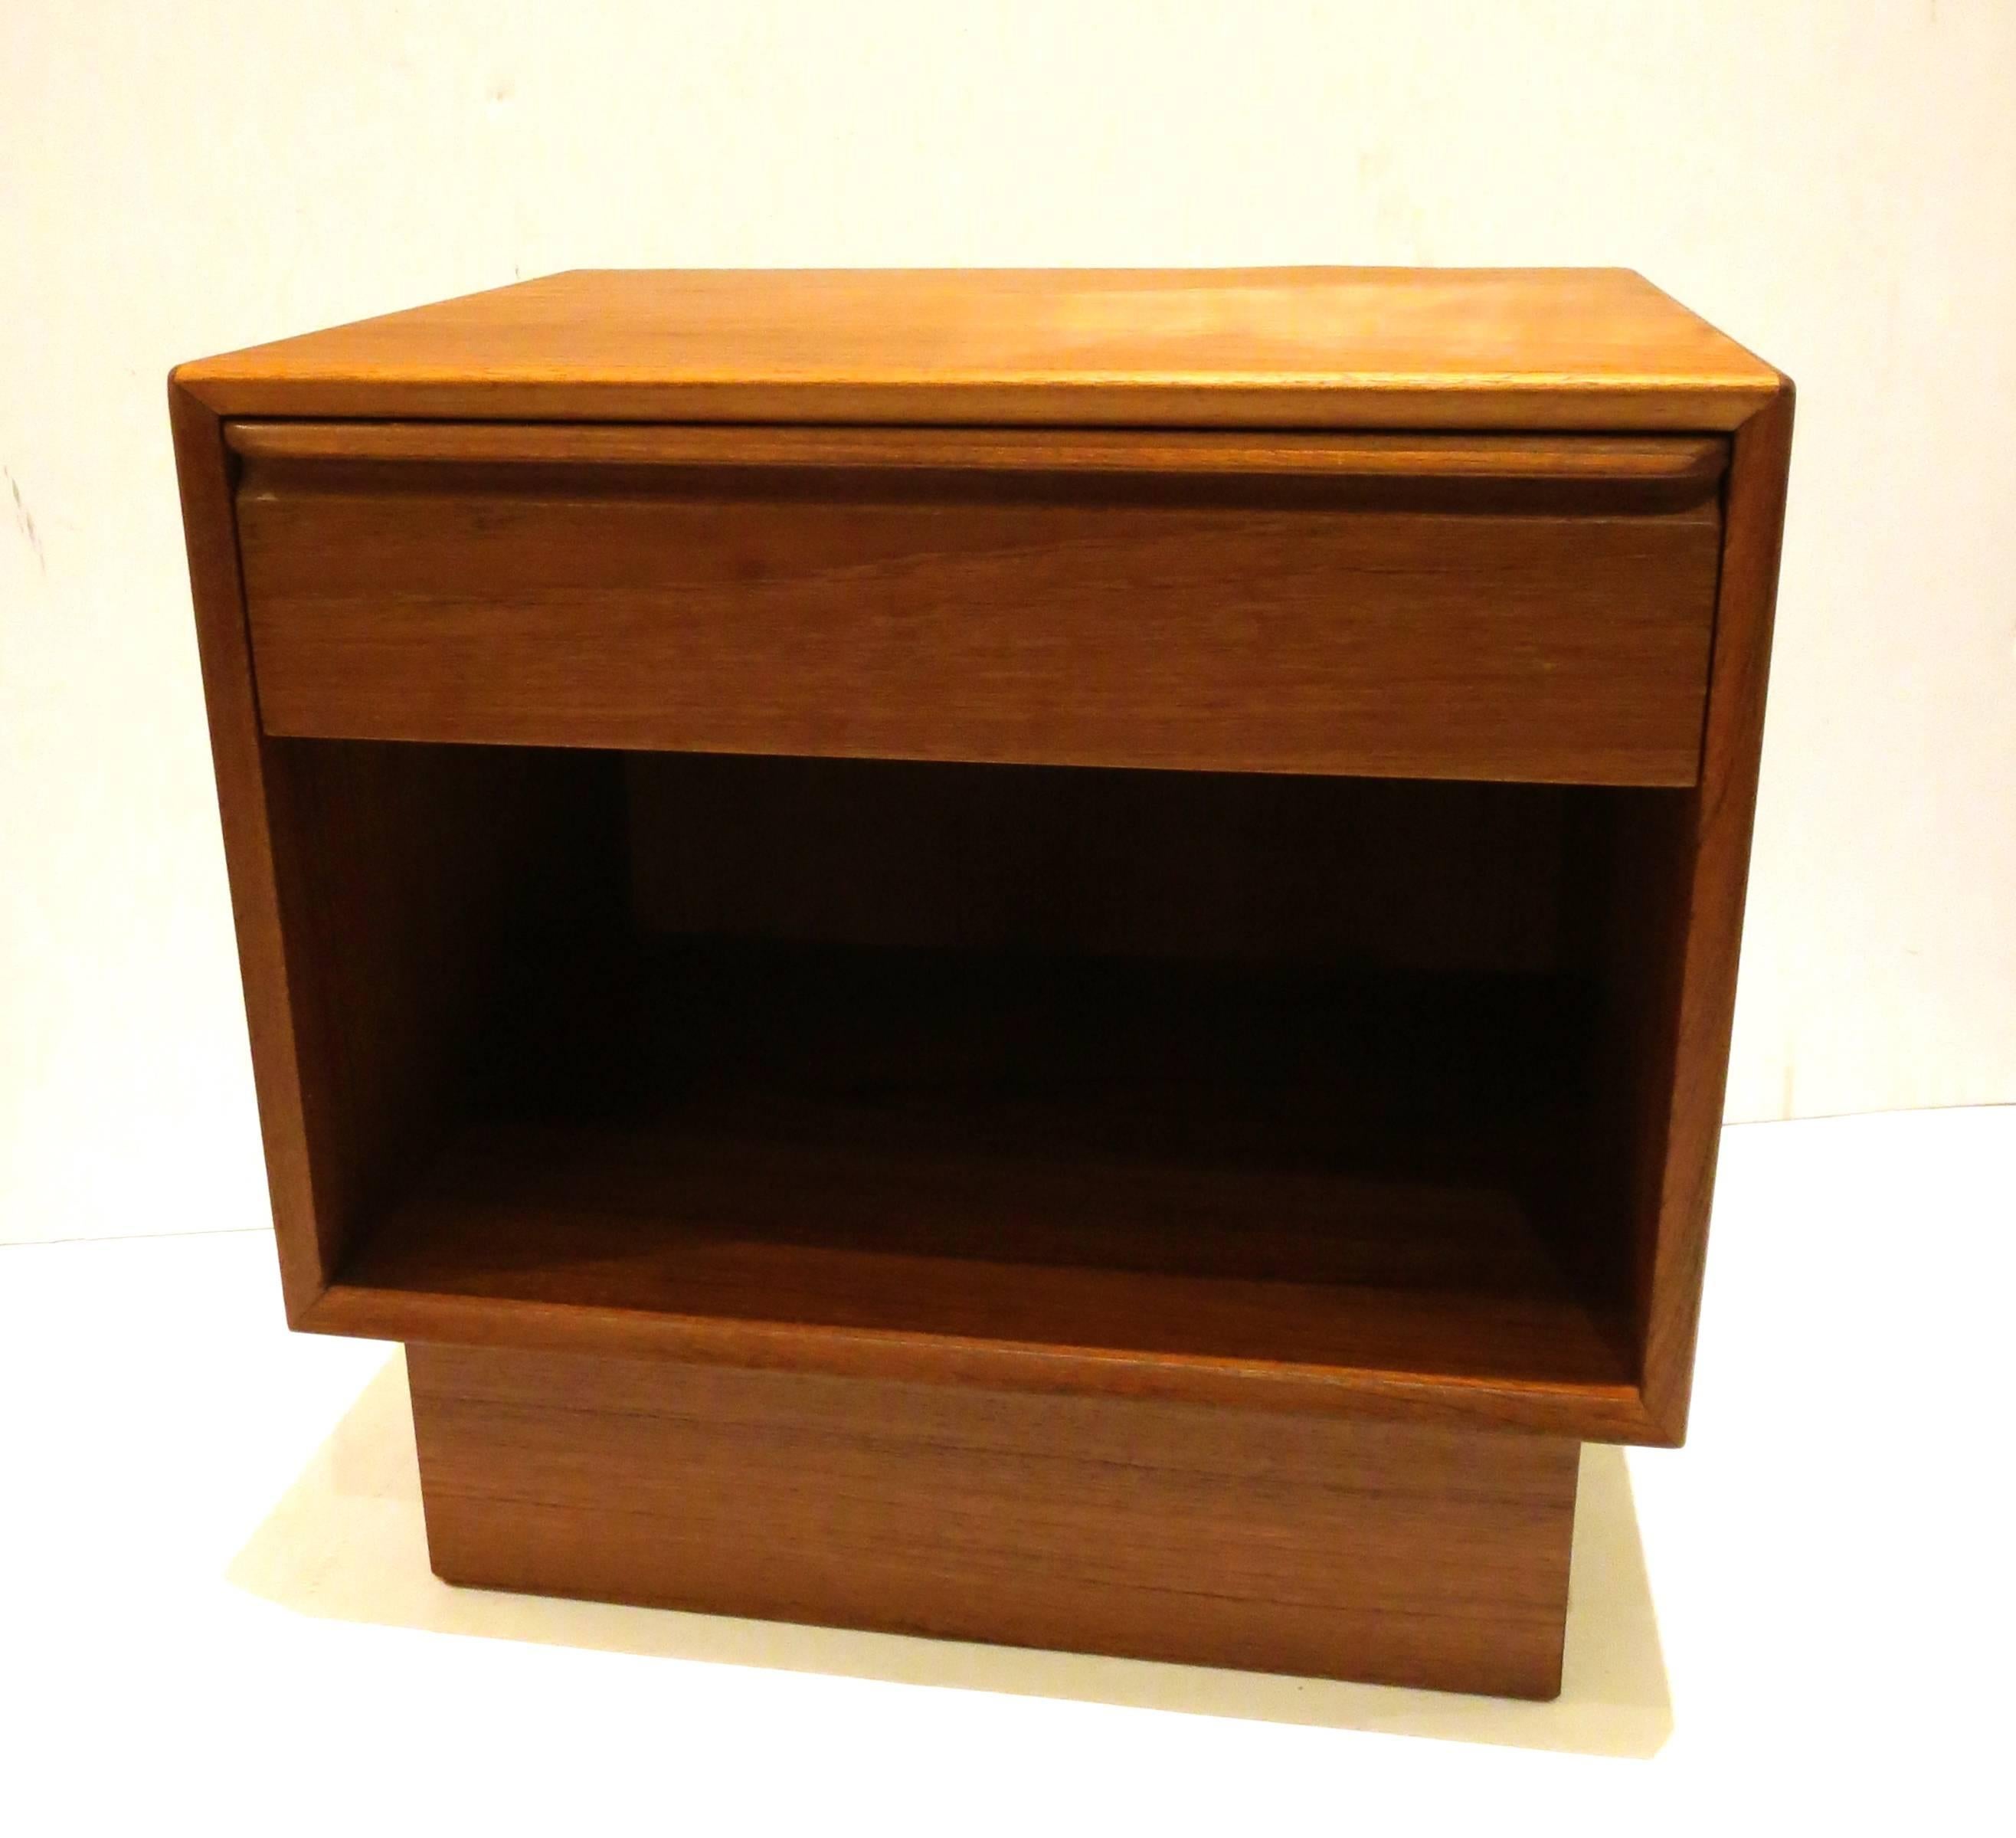 High quality and great design, on this single drawer with dove tail, teak nightstand by Westnofa. Made in Norway, circa 1960s. Retains part of the label.